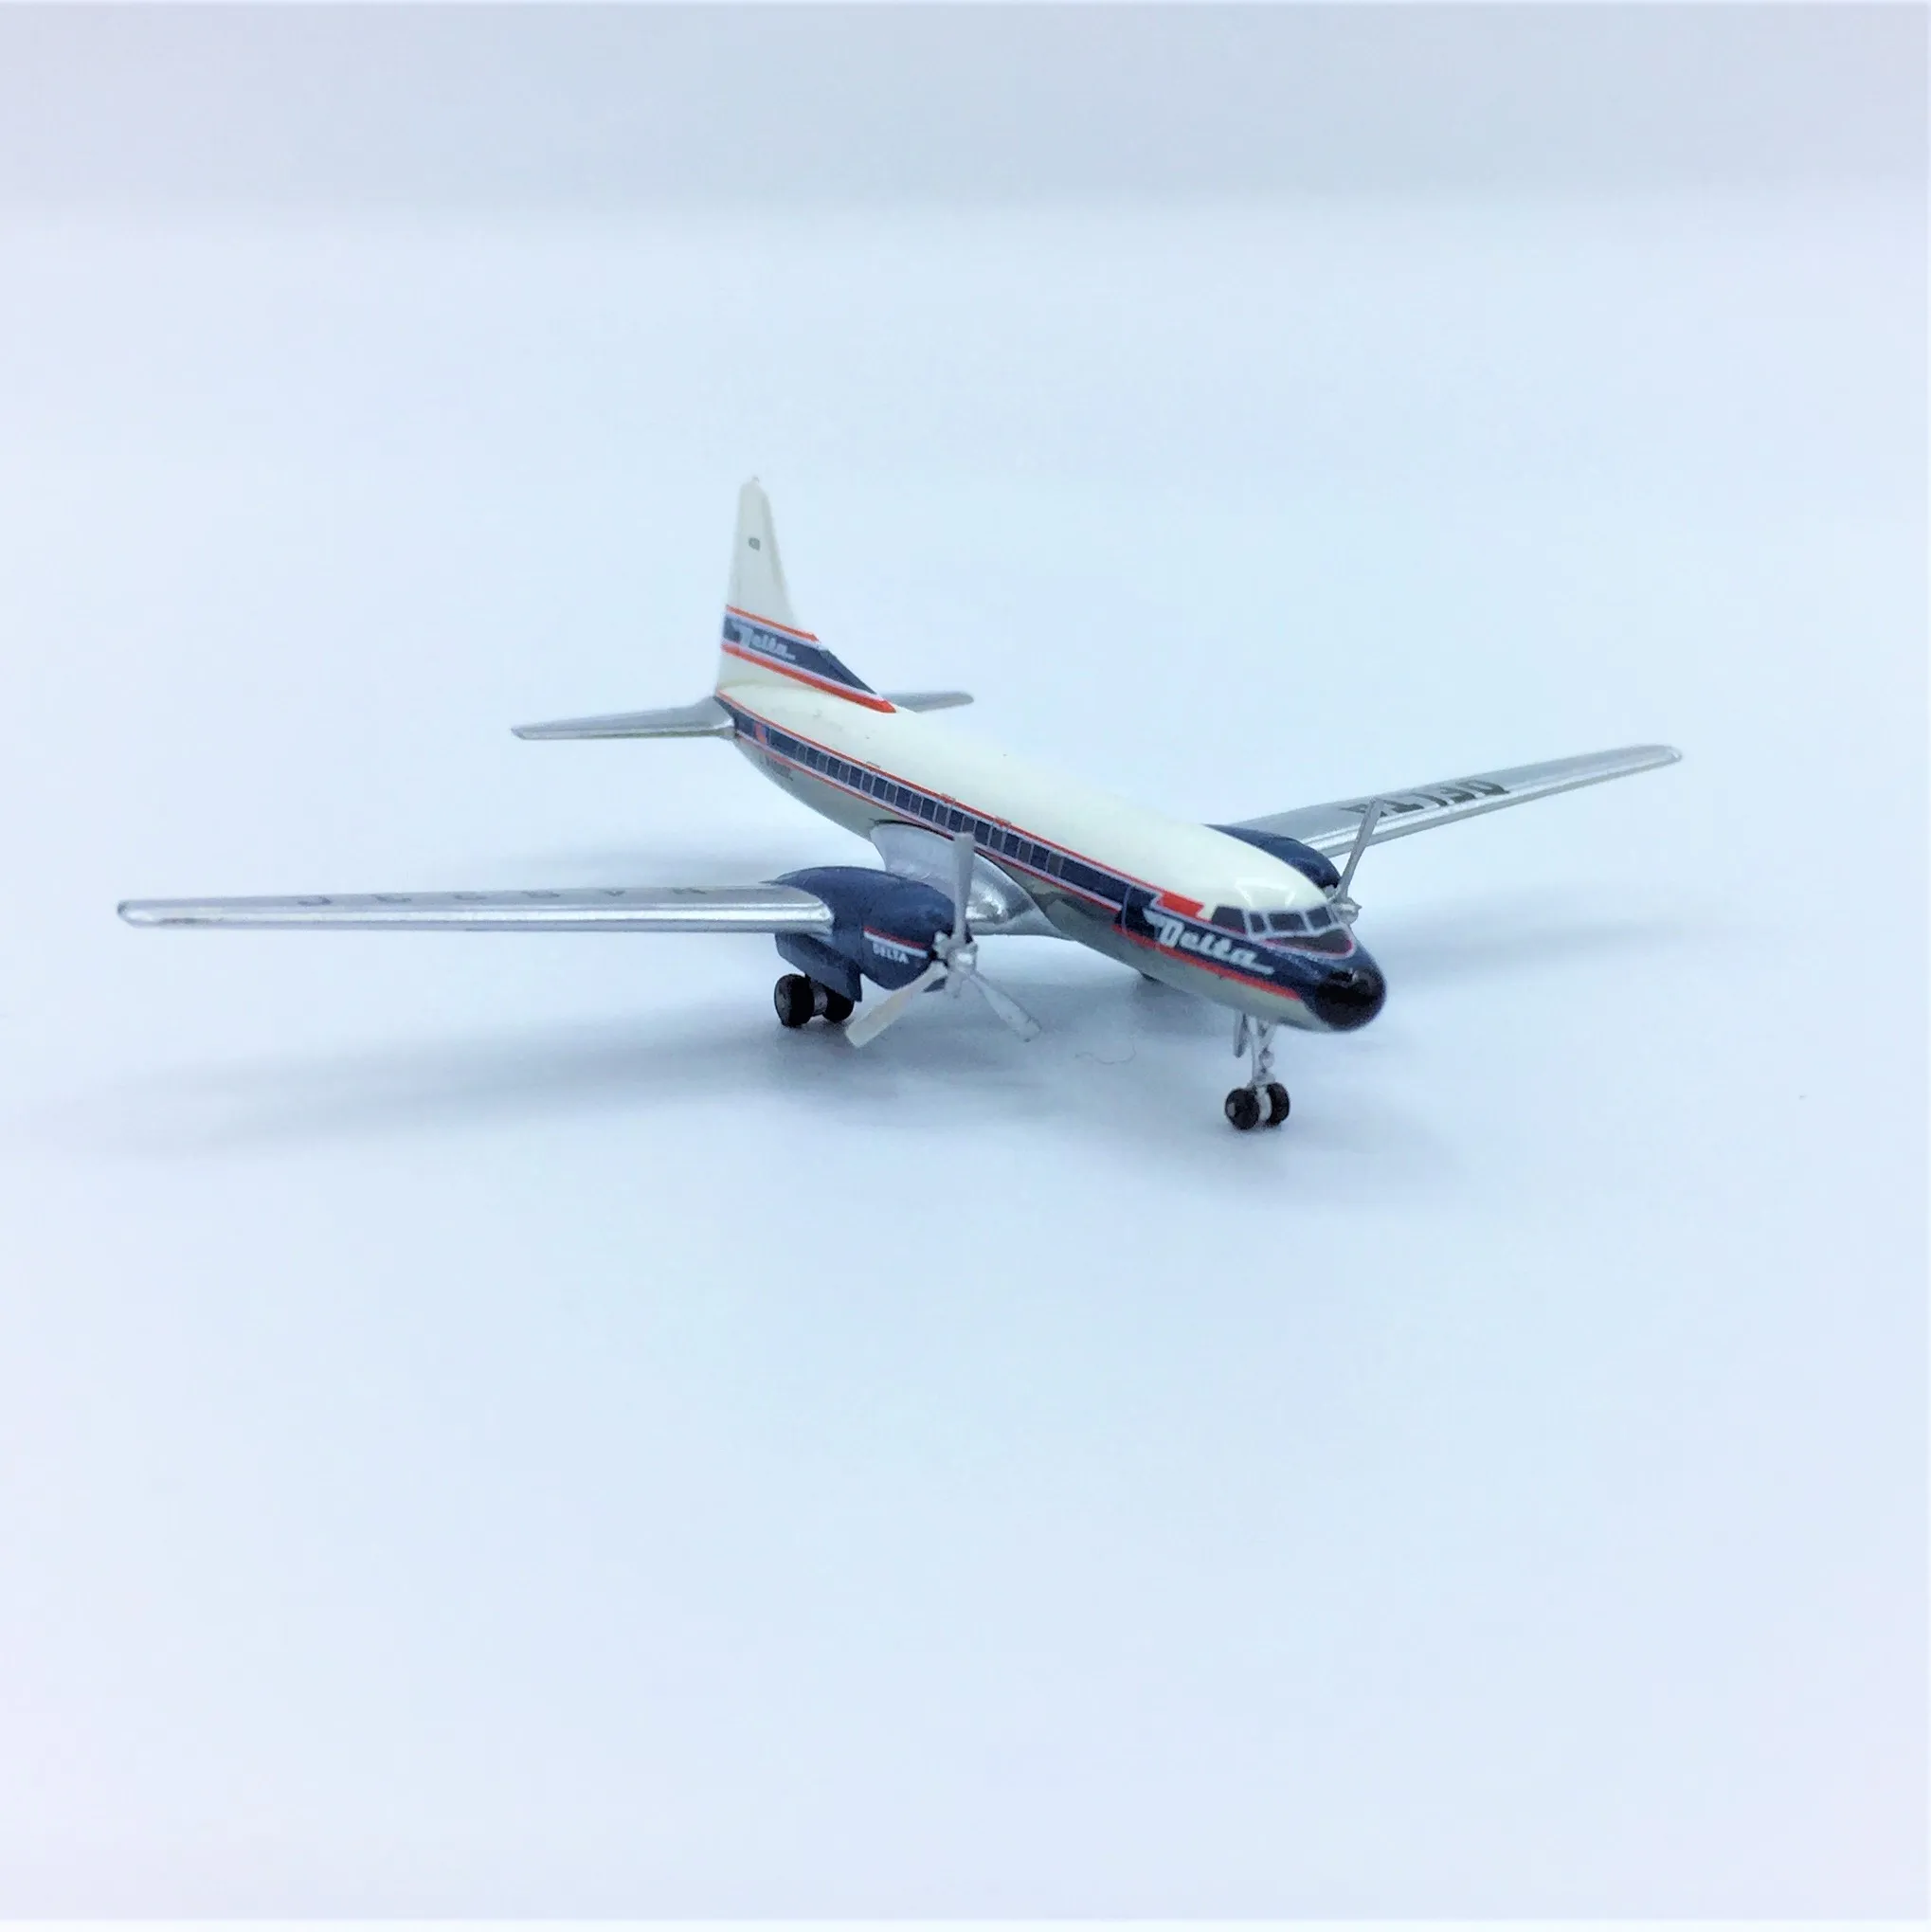 model aircraft for sale